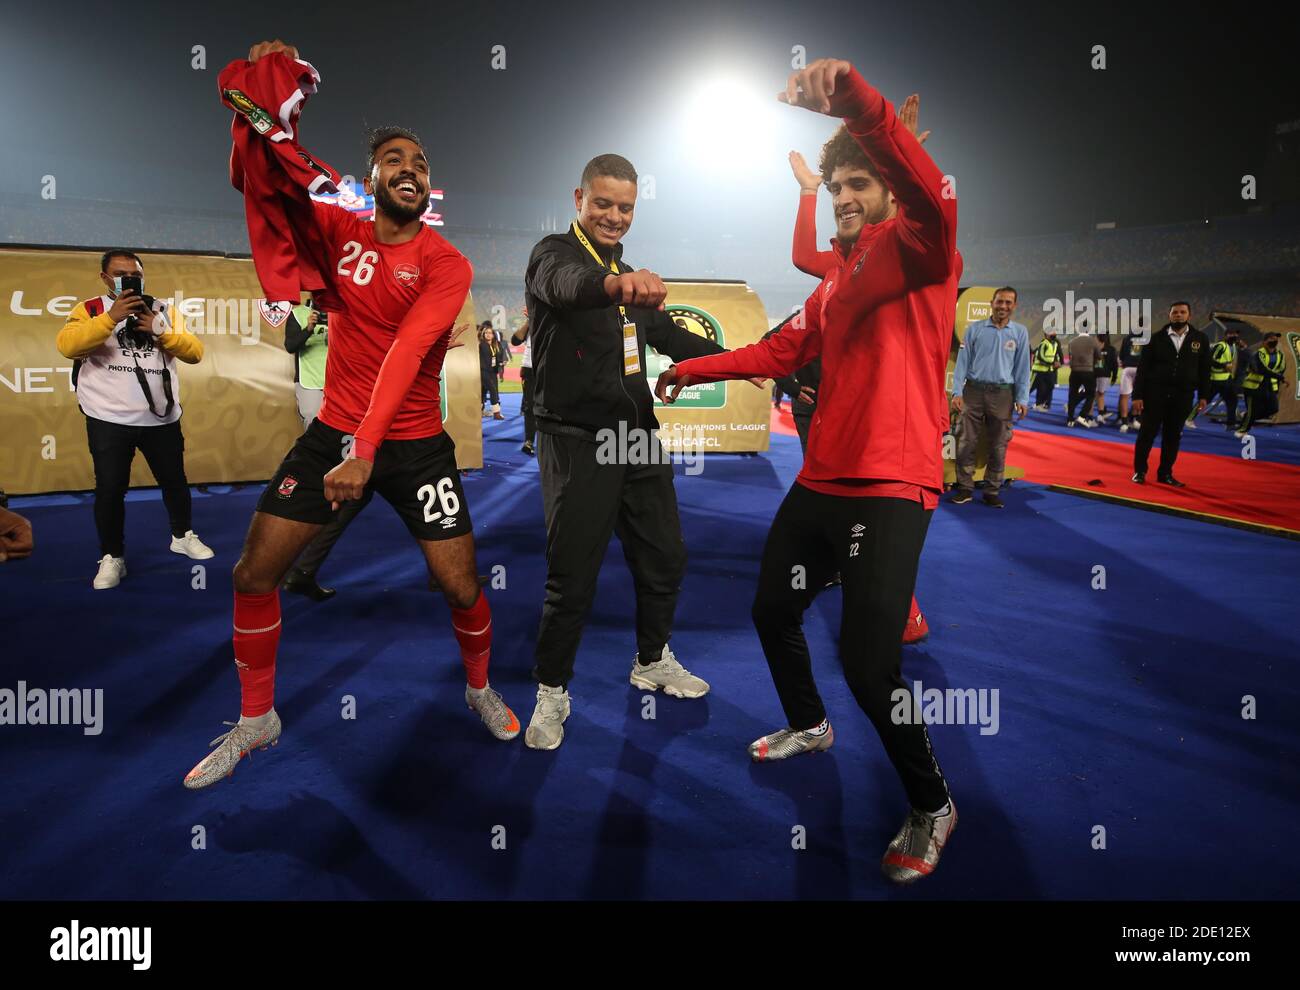 Cairo, Egypt. 27th Nov, 2020. (L-R) Al Ahly's Kahraba, Saad Samir and Ahmed El Sheikh celebrate after winning the African Champions League Final soccer match against Zamalek at Cairo International Stadium. Credit: Sameh Abo Hassan/dpa/Alamy Live News Stock Photo